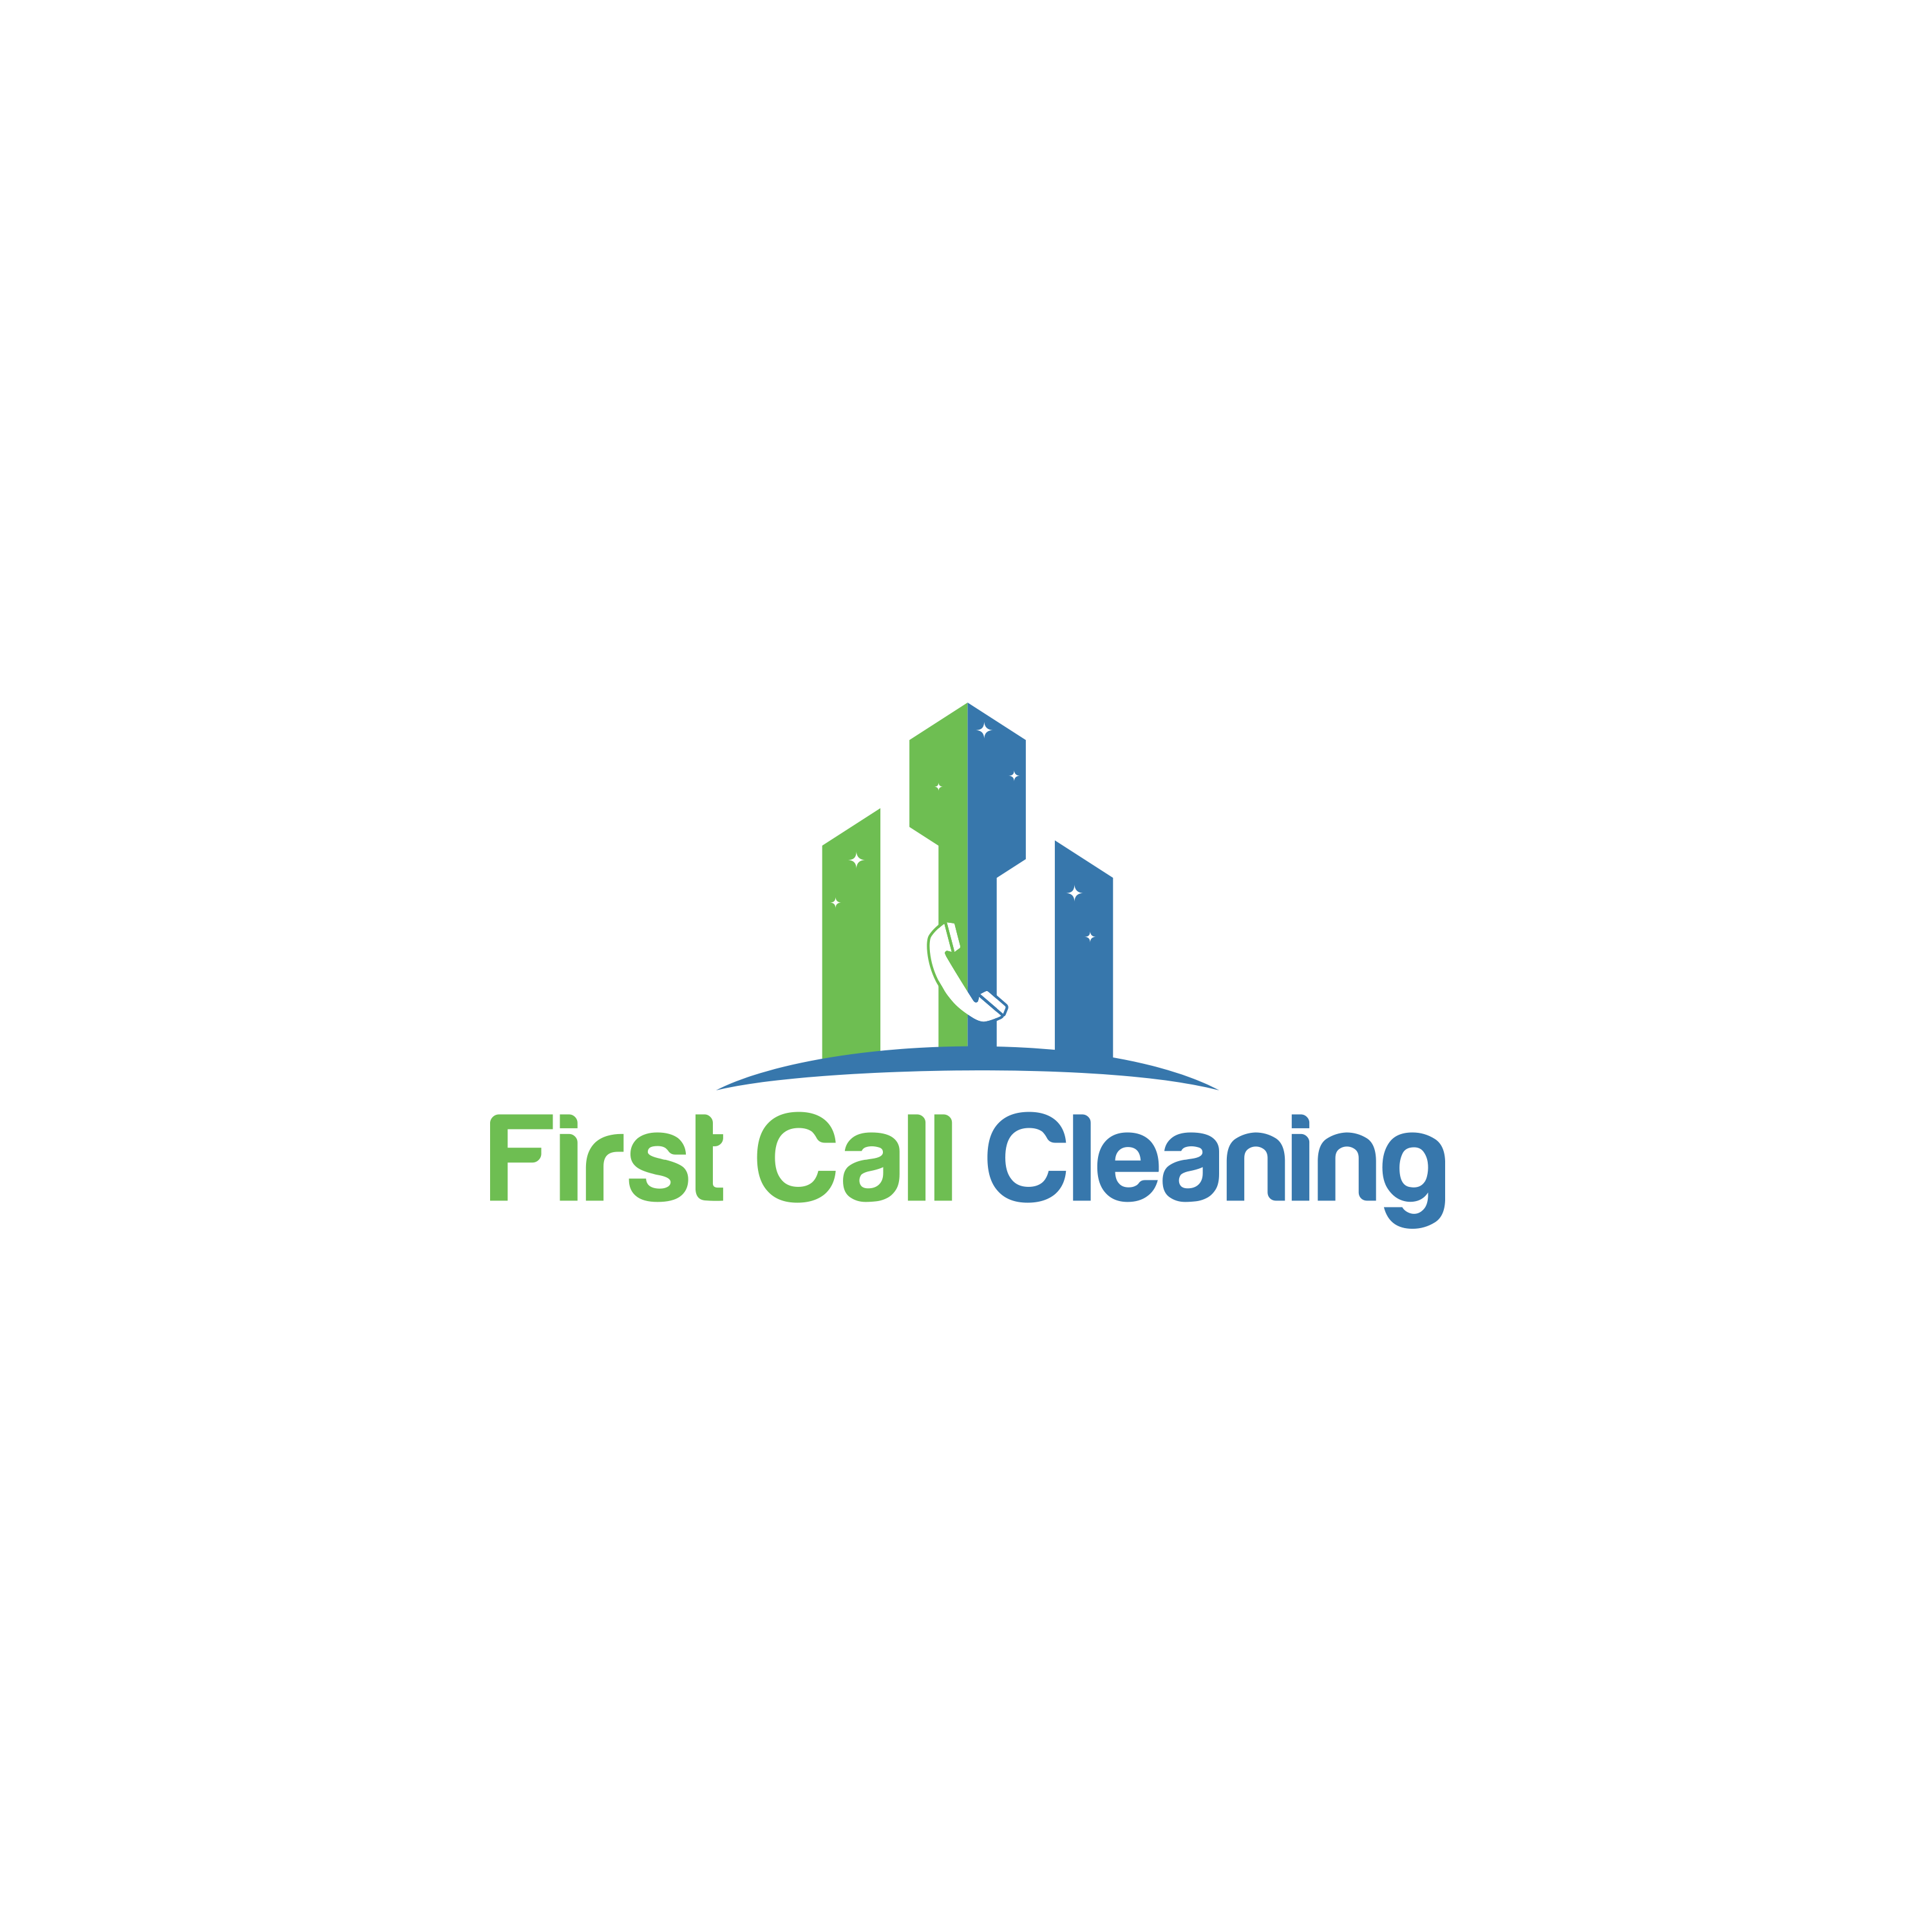 First Call Cleaning Design #1